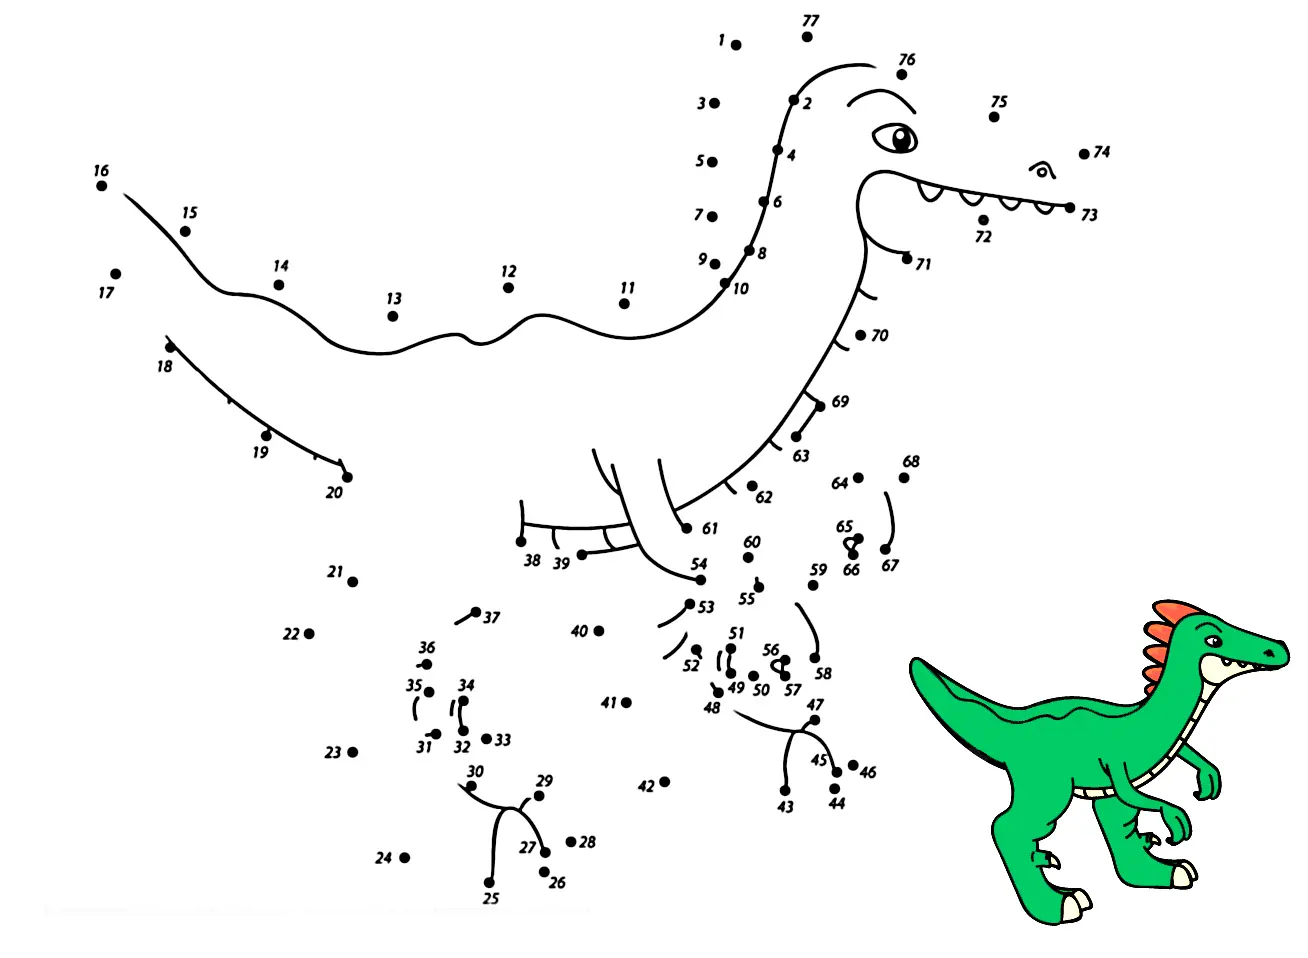 Velociraptor Coloring Pages